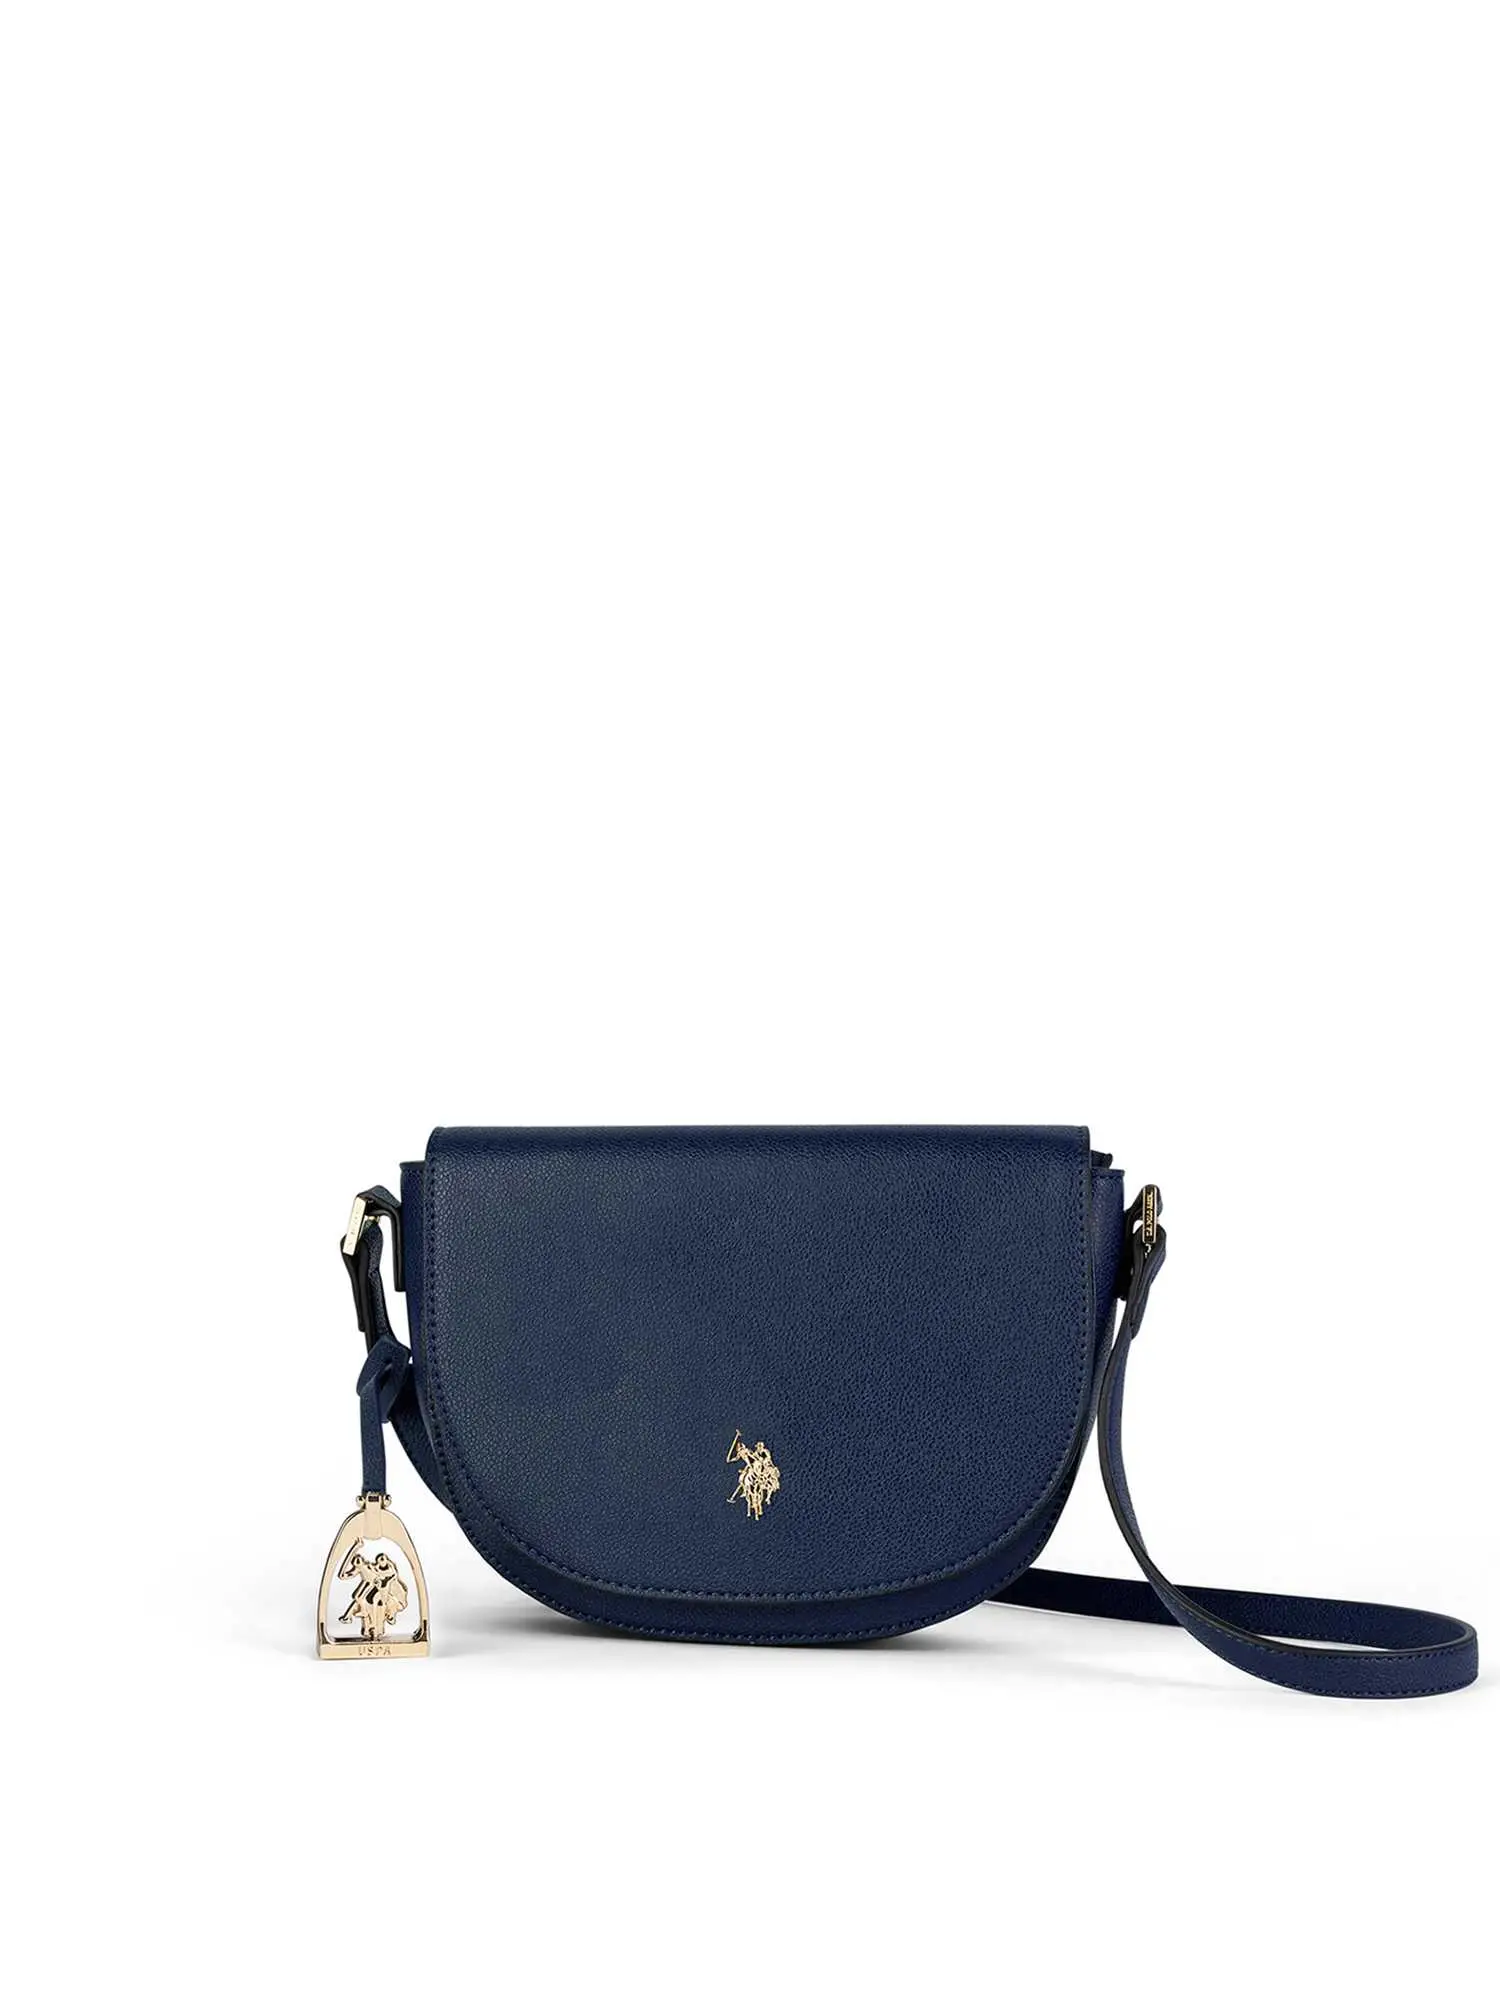 TRACOLLA DONNA - US POLO ASSN. - BIUJE6311WVP - NAVY, UNICA